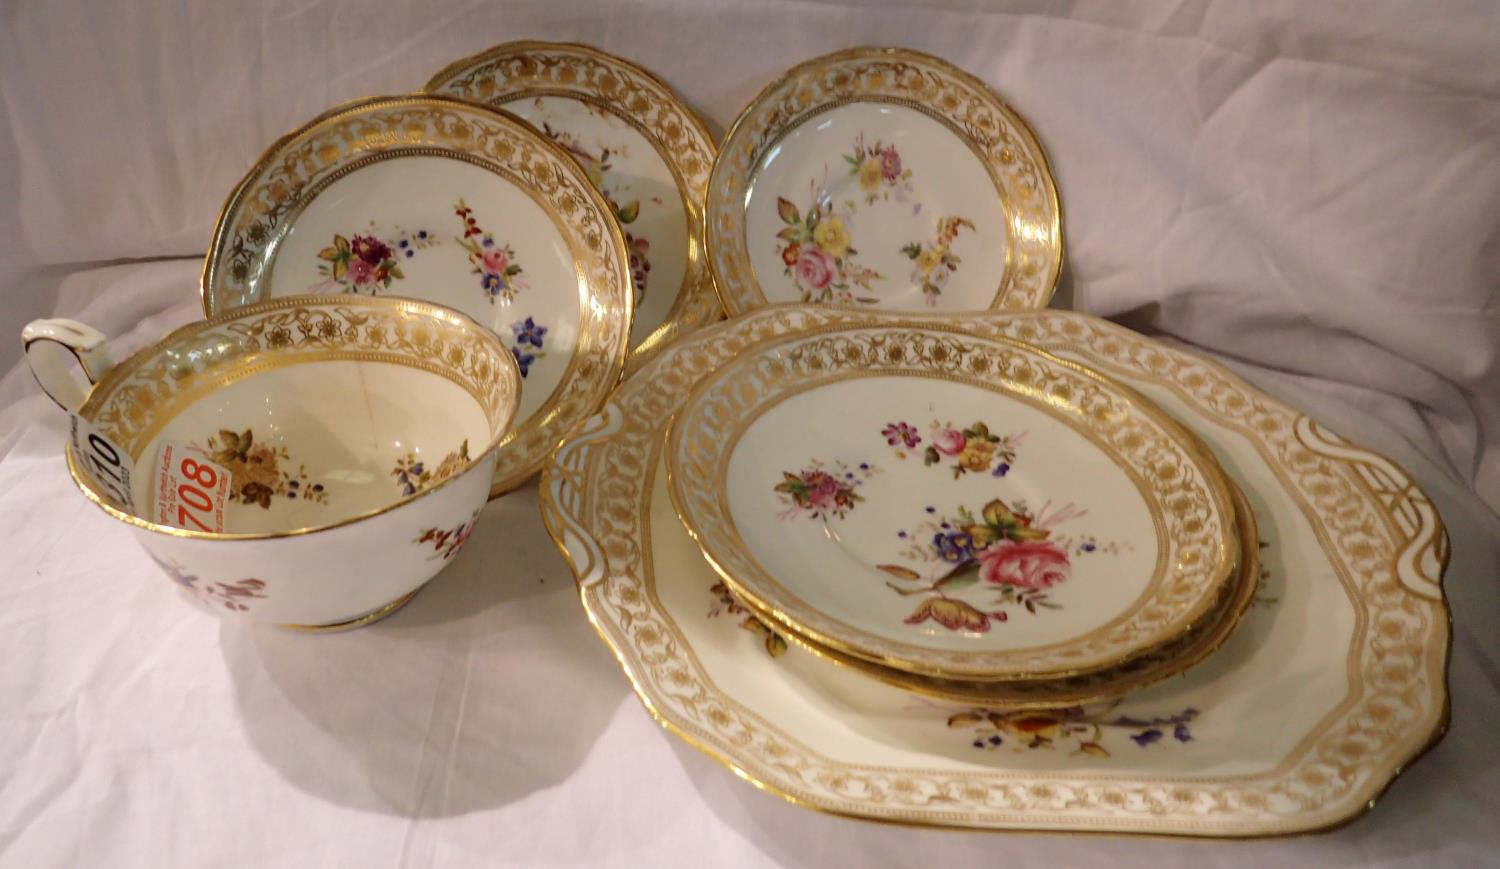 Hammersley of Longton saucers, plates and cup. P&P Group 3 (£25+VAT for the first lot and £5+VAT for